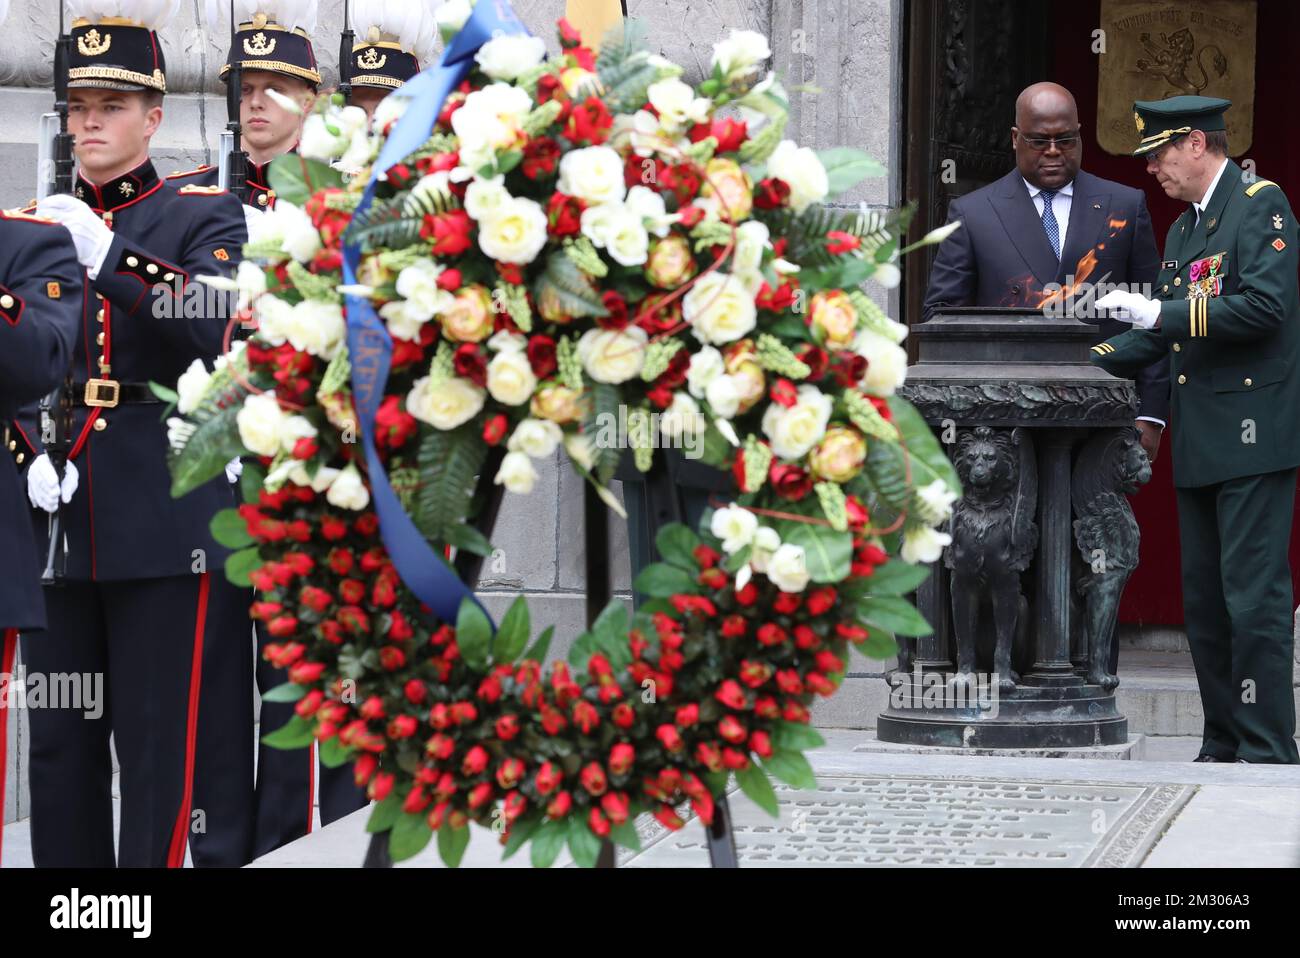 DRC Congo President Felix Tshisekedi pictured at the tomb of the Unknown Soldier, at the Congress Column (Colonne du Congres - Congreskolom), part of the offical visit of DRC Congo President for several days in Belgium, Tuesday 17 September 2019, in Brussels. BELGA PHOTO BENOIT DOPPAGNE  Stock Photo